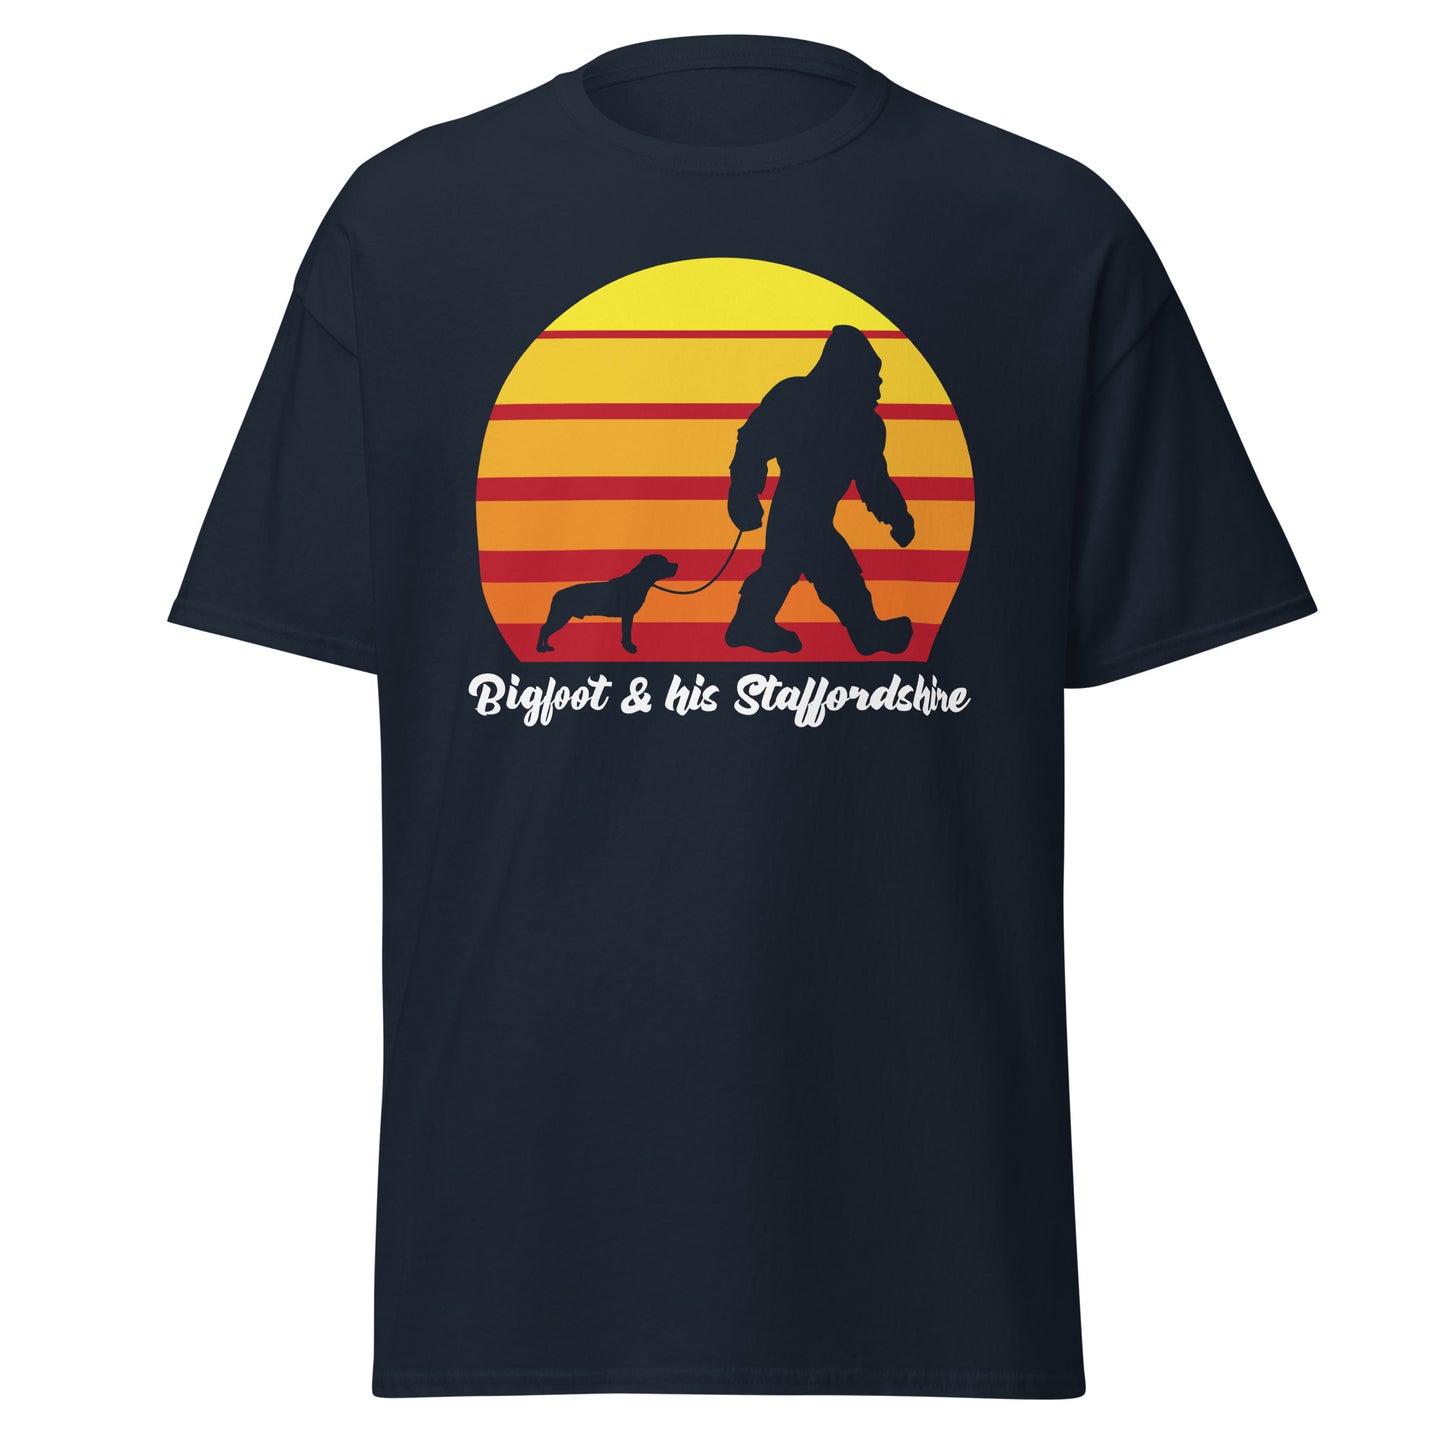 Bigfoot and his Staffordshire Bull Terrier Men's classic tee